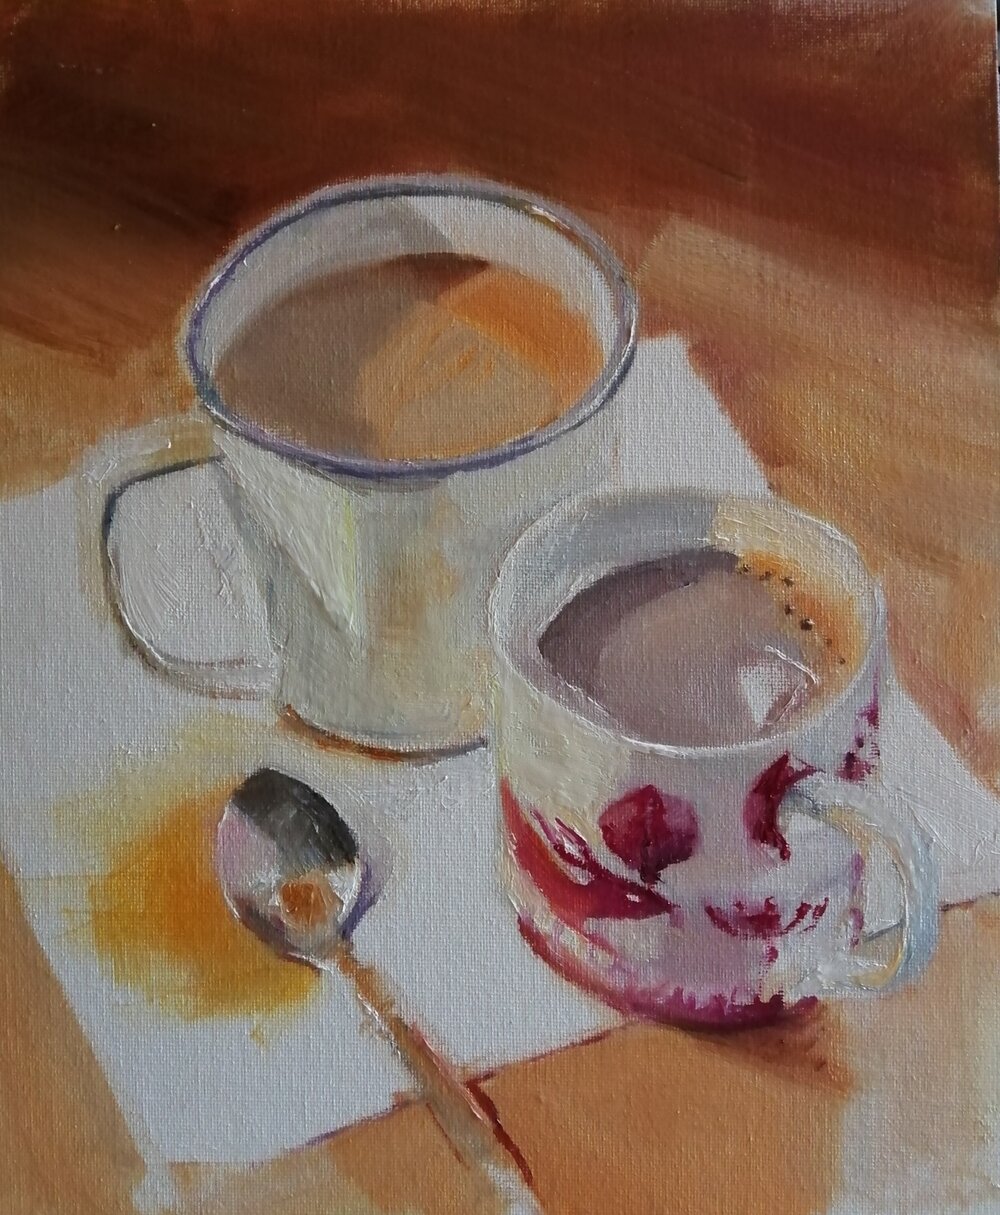  Tea or chocolate?  Oil on board  25.5x30.5 cms  £395  A still life composition with two cups of hot drinks on a diagonally placed square of material. 